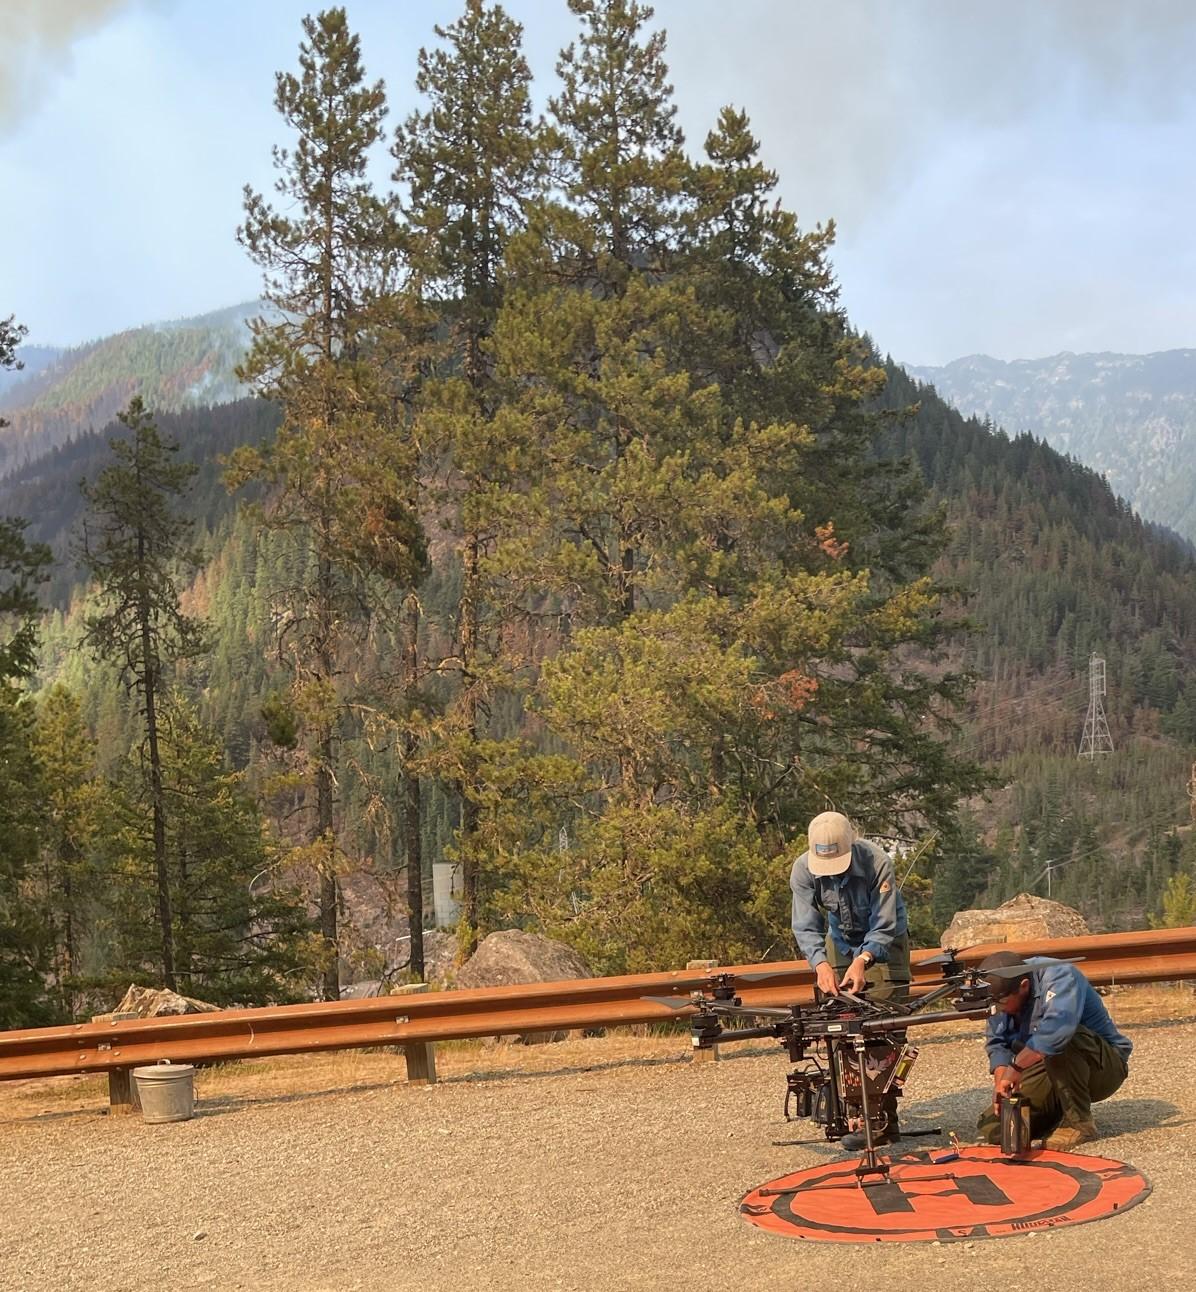 A man and a woman with a unmanned aerial system (UAS or drone) on the side of a mountain highway with trees, a lake, mountains and smoke in the background.